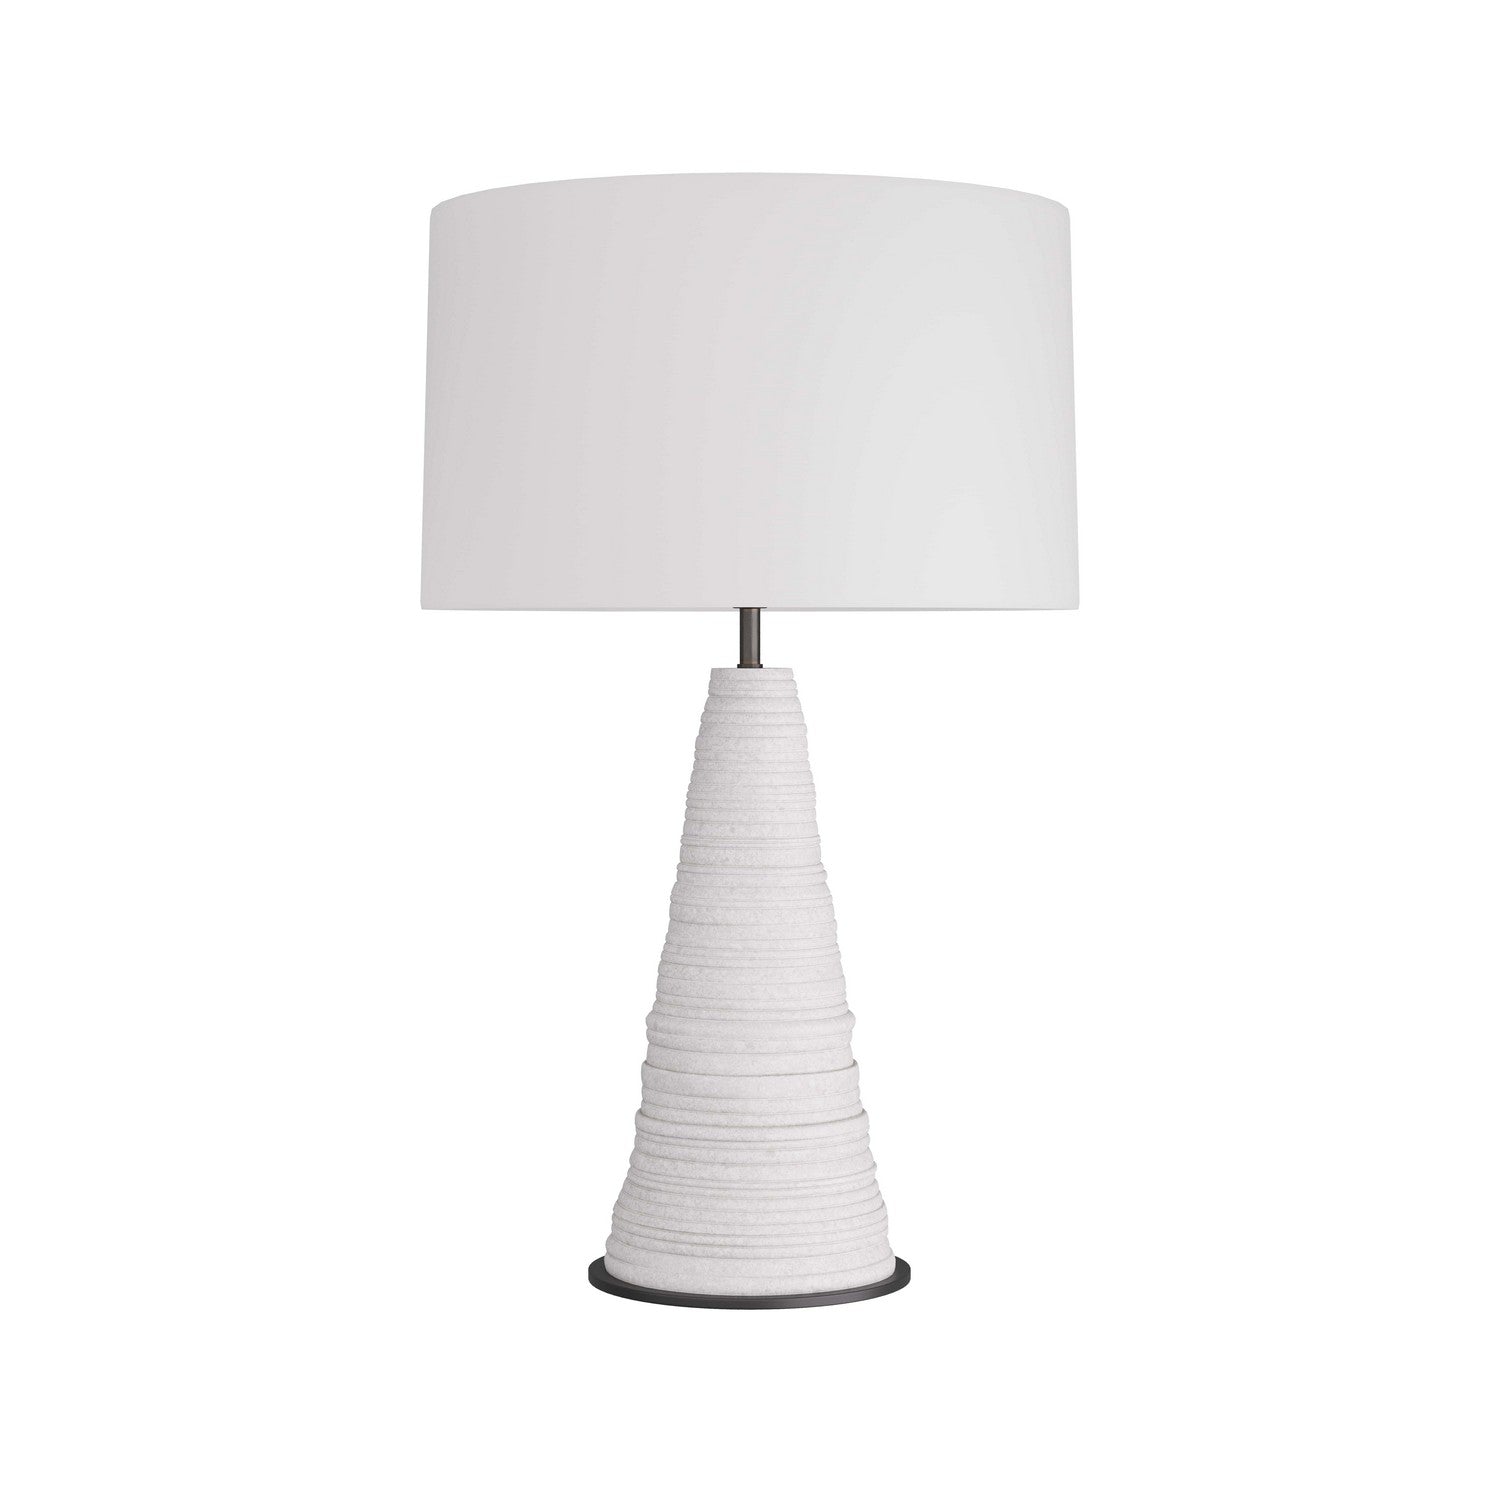 One Light Table Lamp from the Vickery collection in Ivory finish